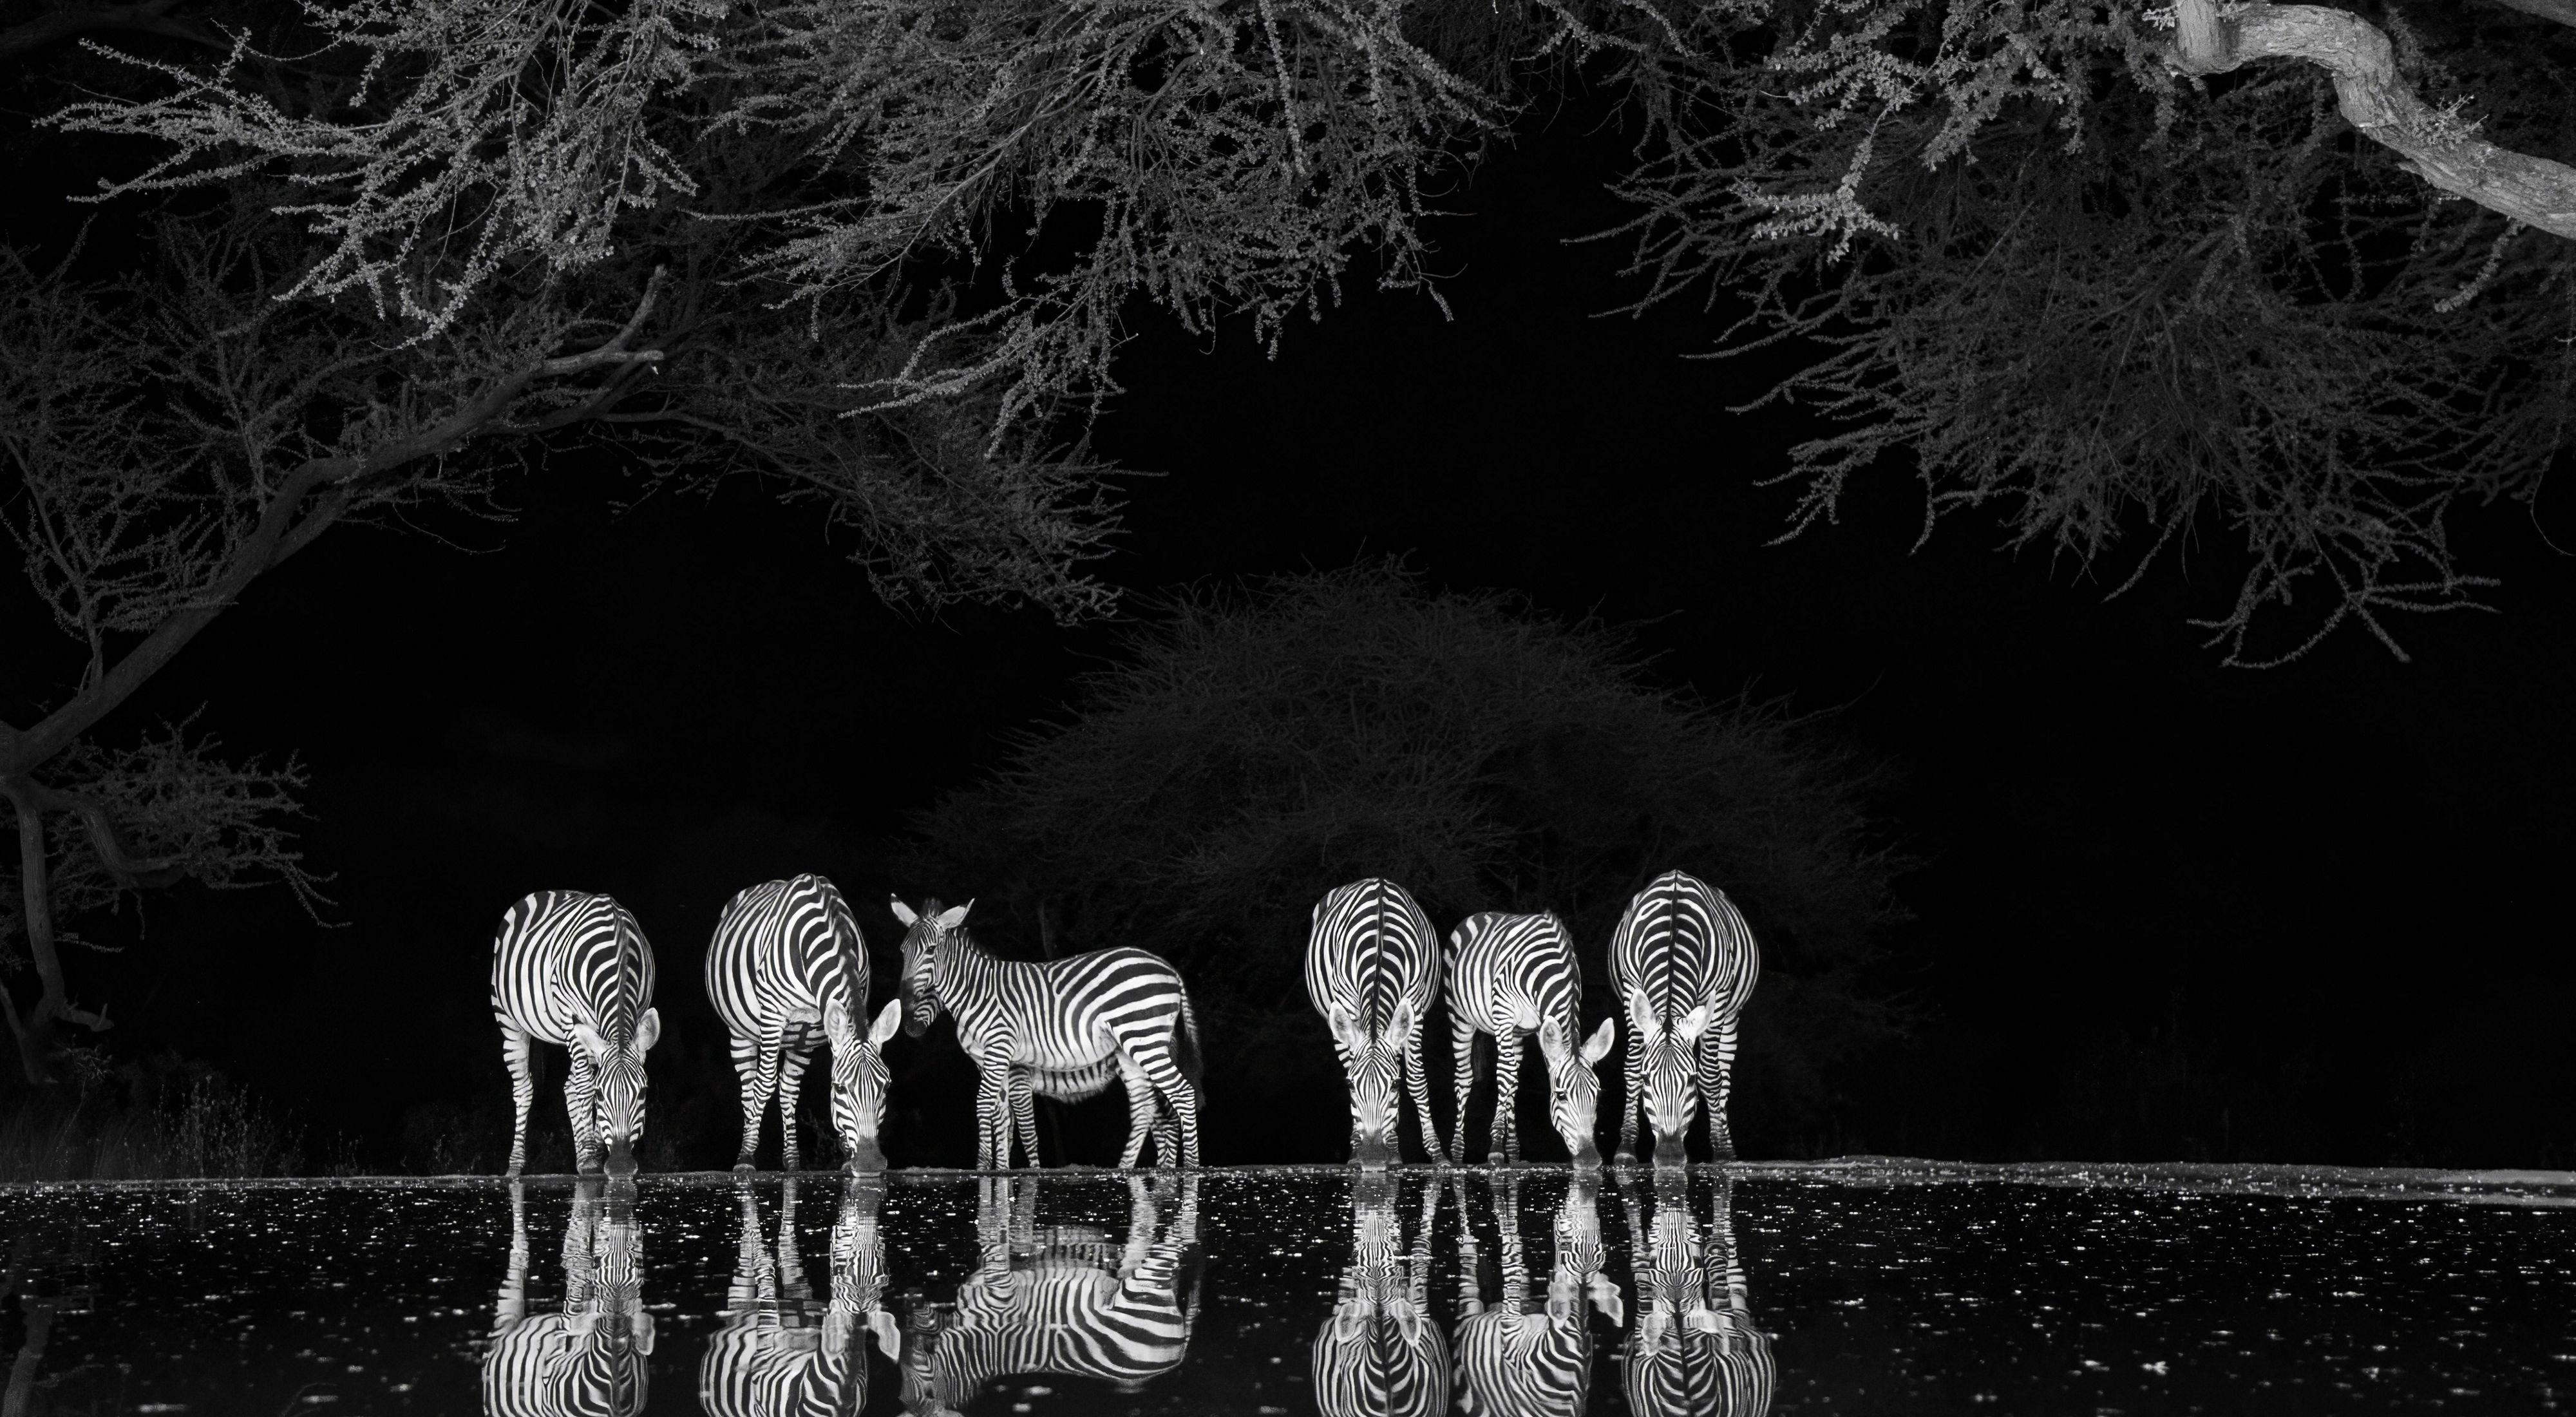 Six zebras stand and drink near a still pool of water